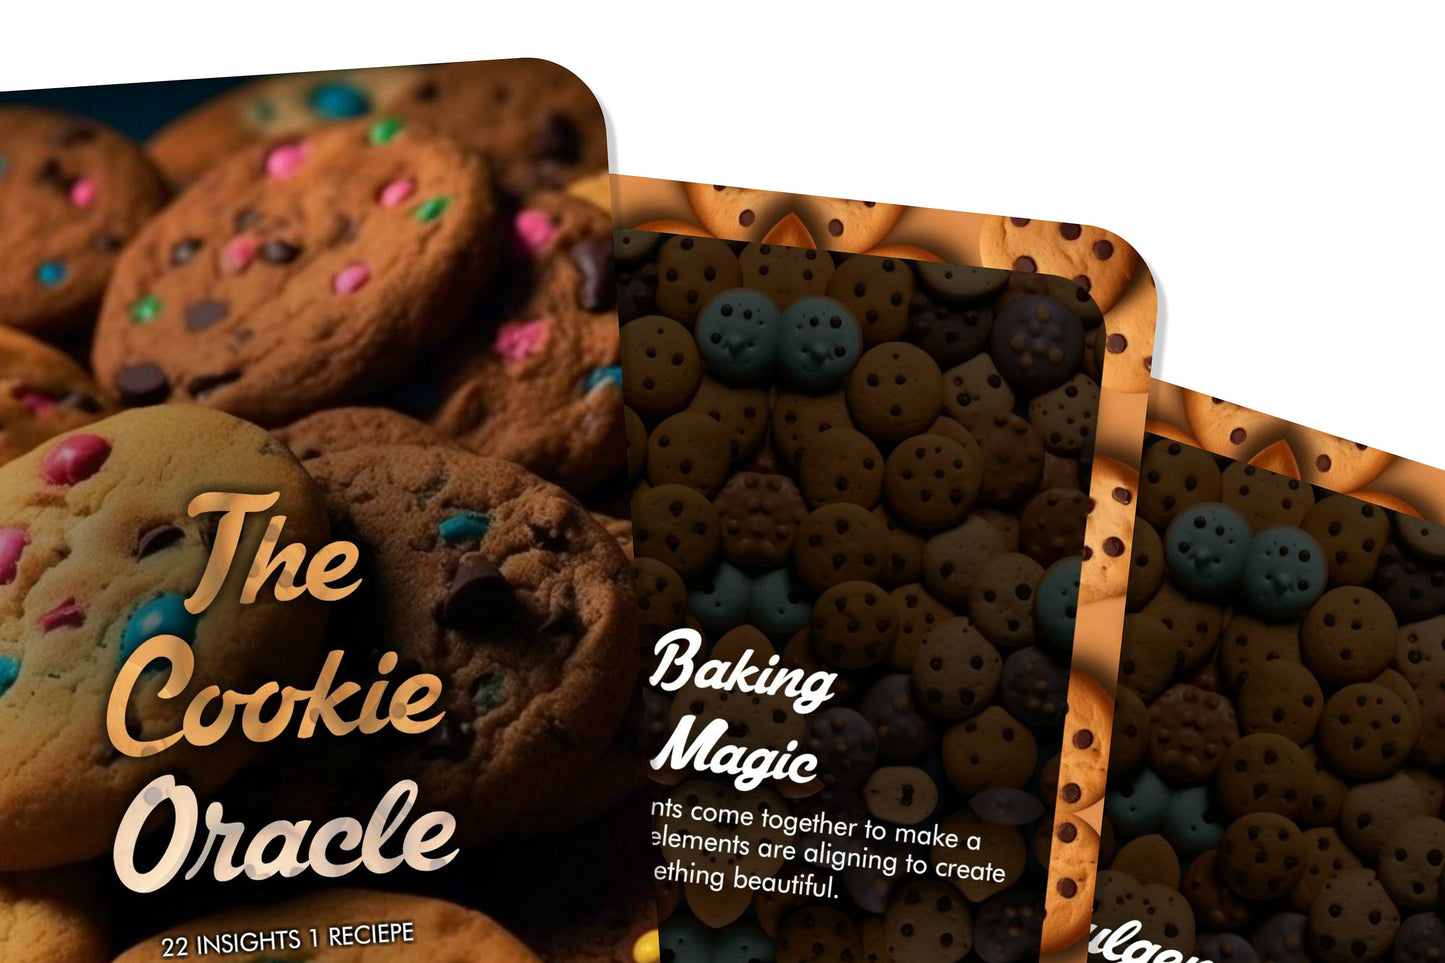 The Cookie Oracle - Twenty Two insights and One recipe